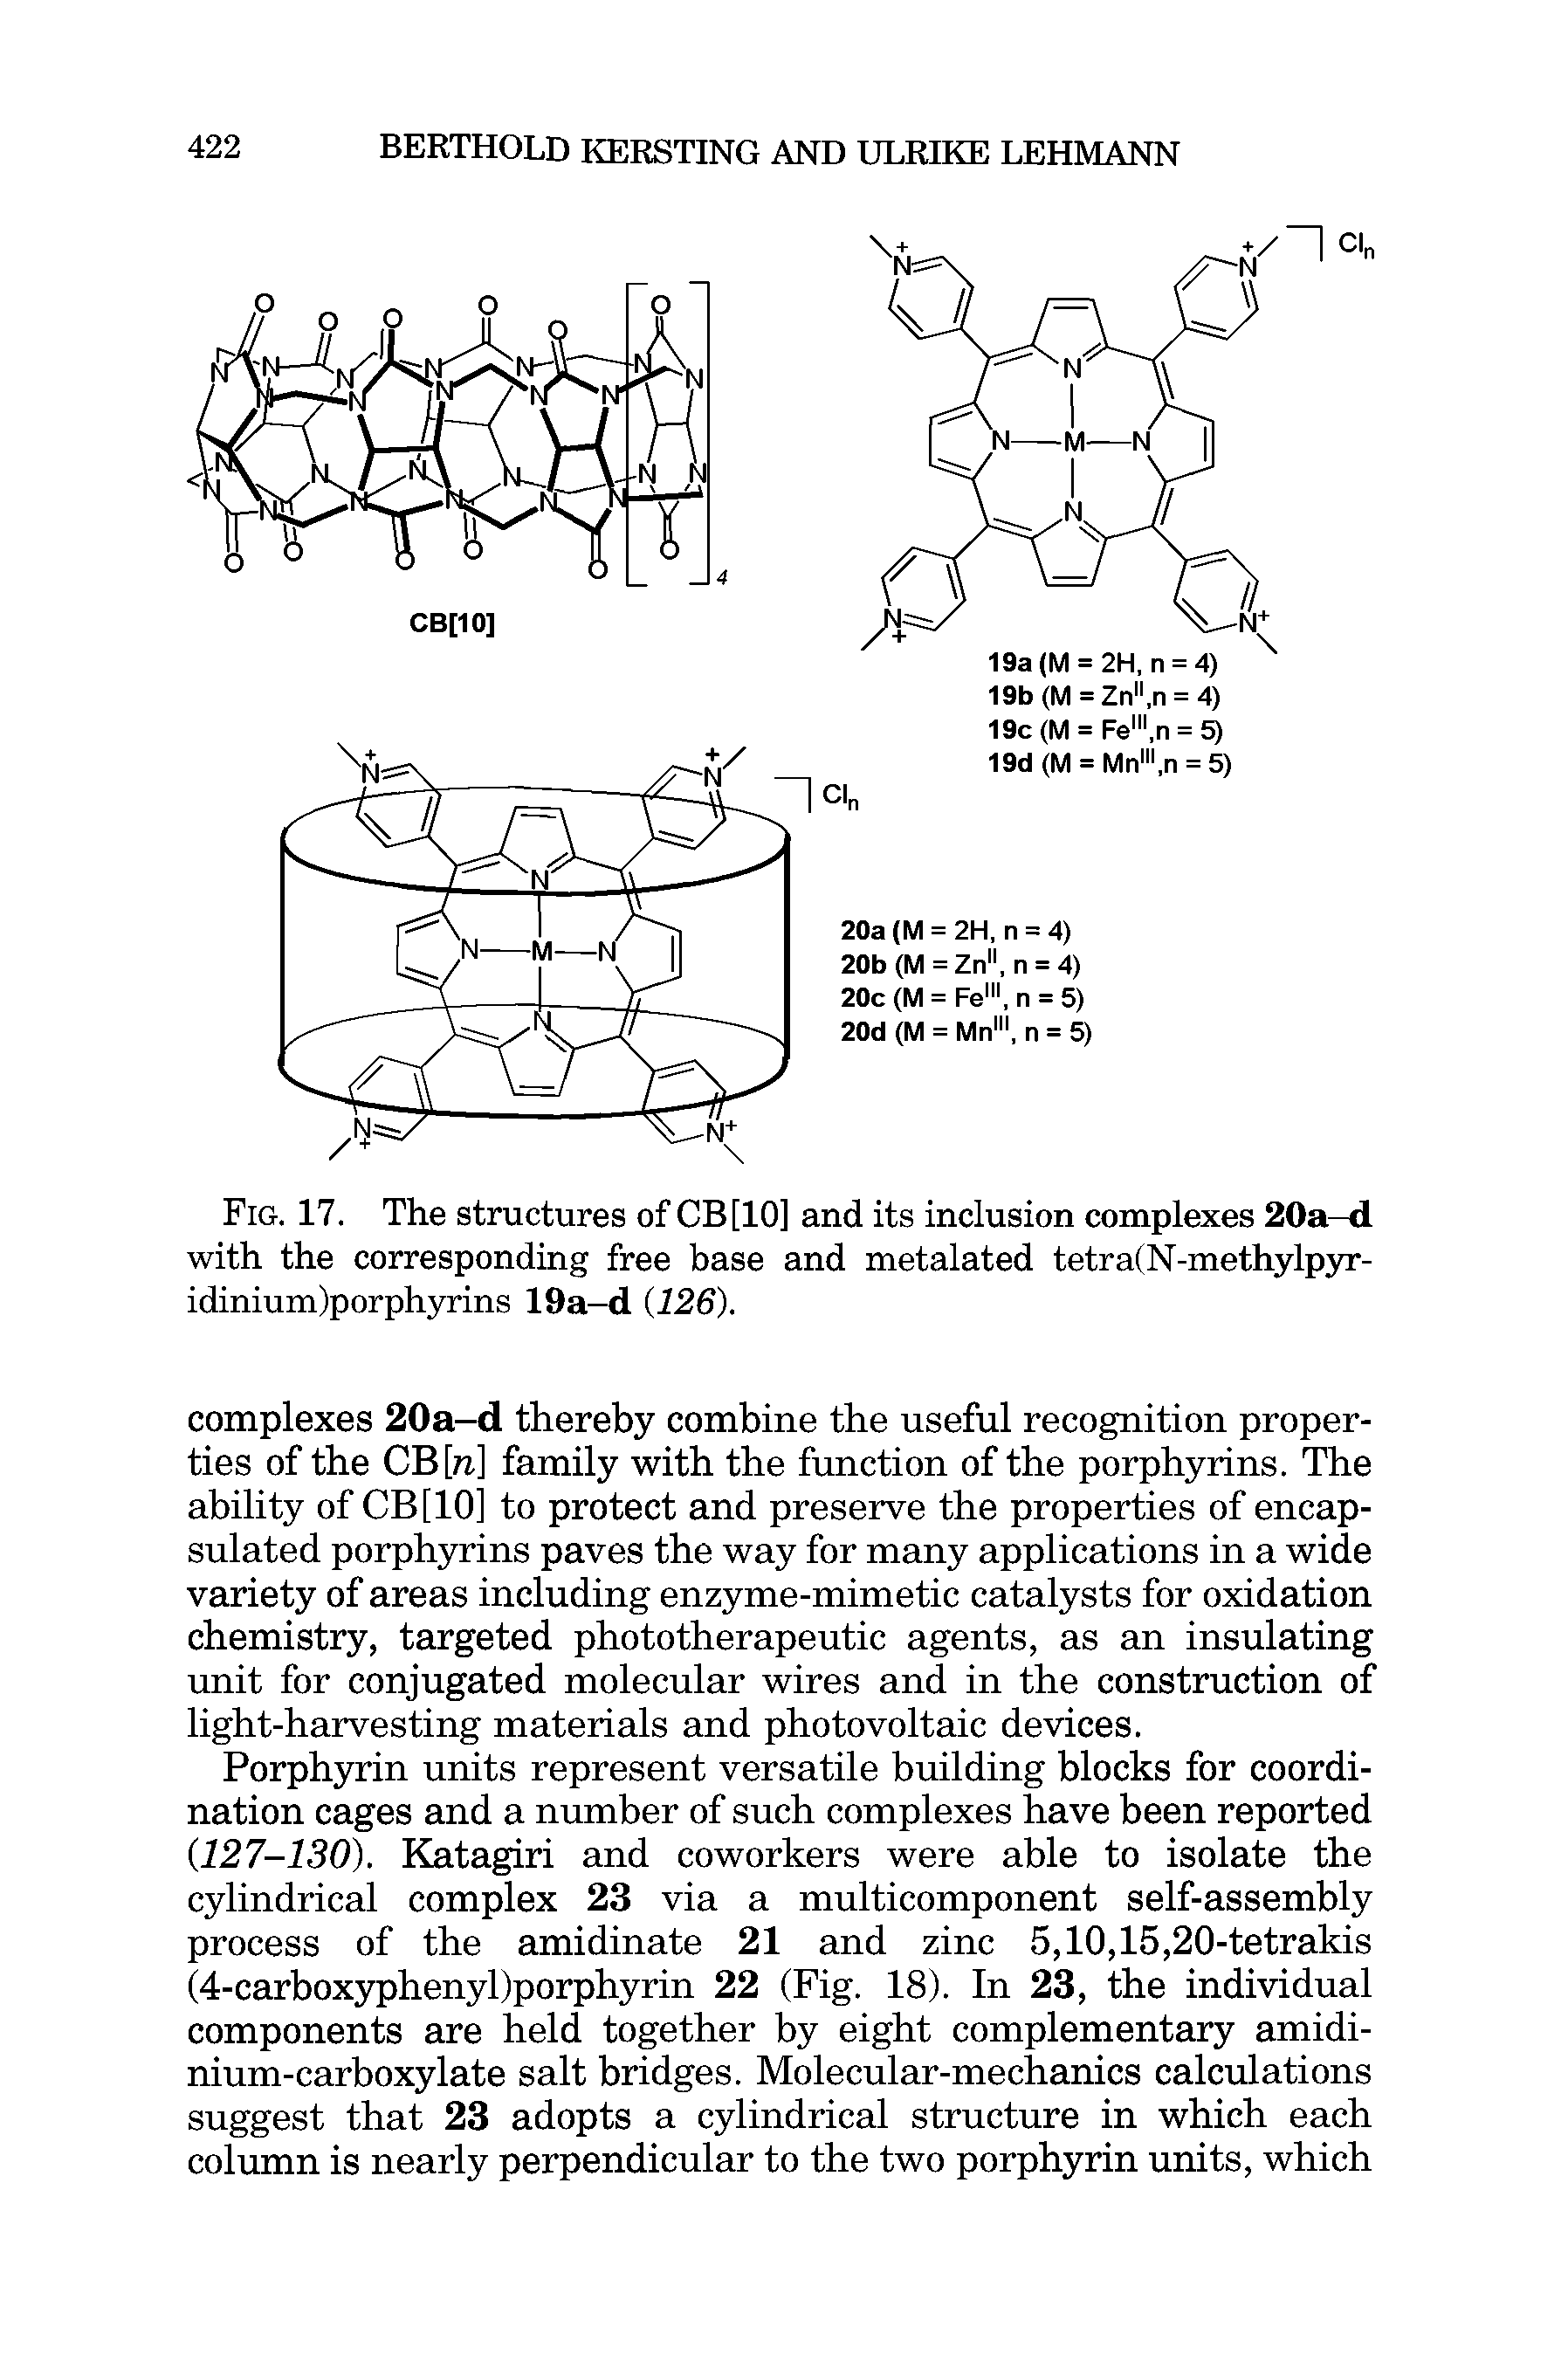 Fig. 17. The structures of CB[10] and its inclusion complexes 20a-d with the corresponding free base and metalated tetra(N-methylpyr-idinium)porphyrins 19a-d (126).